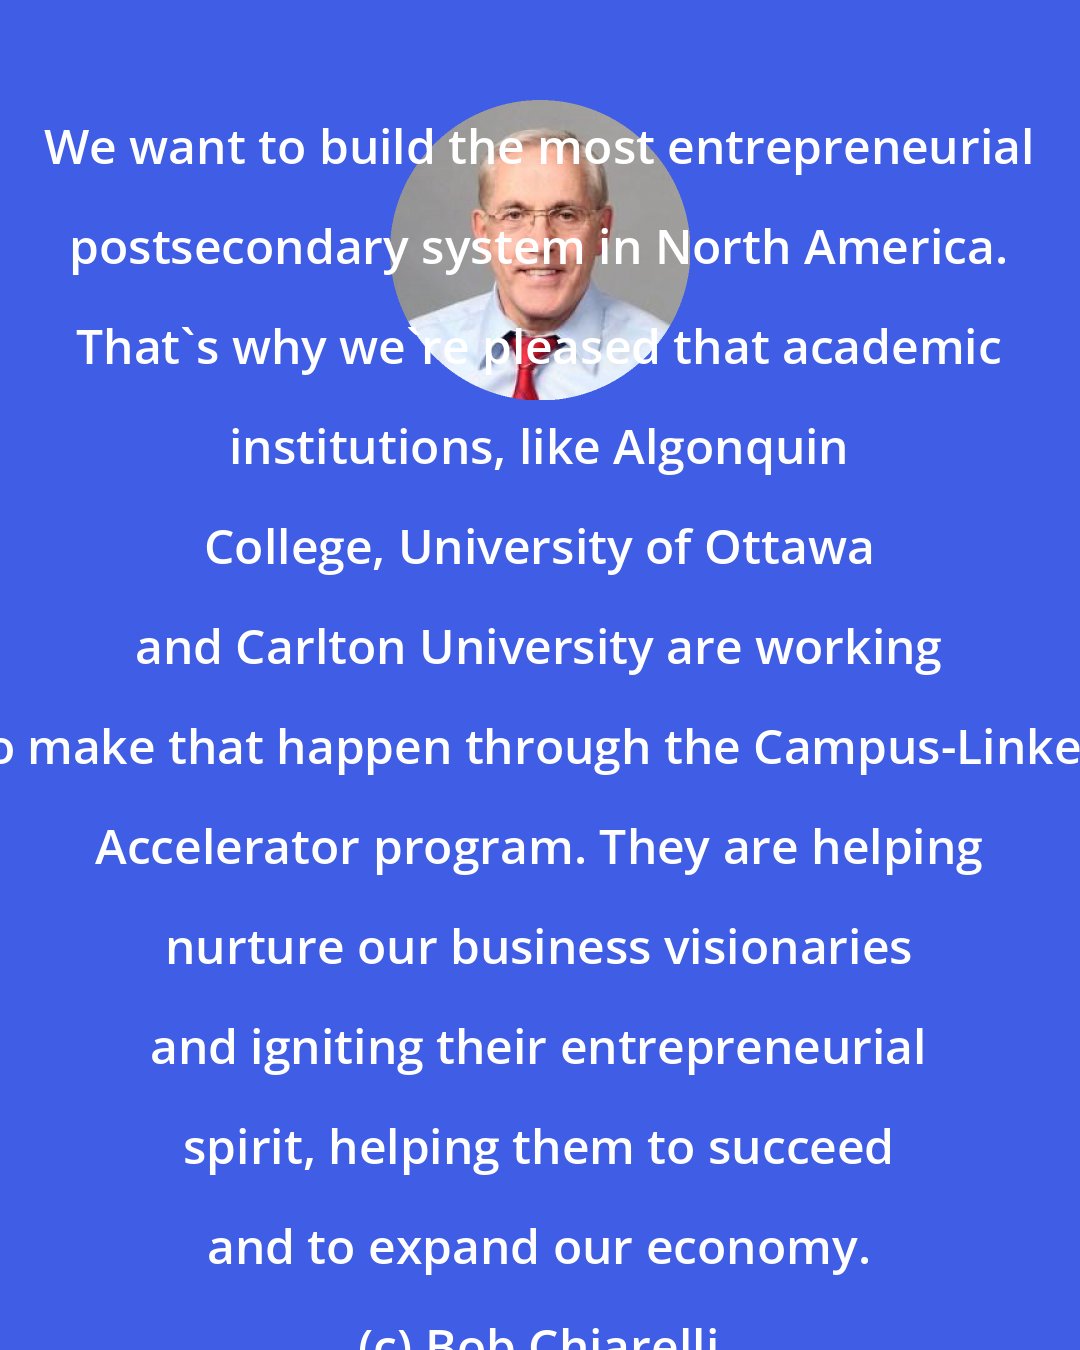 Bob Chiarelli: We want to build the most entrepreneurial postsecondary system in North America. That's why we're pleased that academic institutions, like Algonquin College, University of Ottawa and Carlton University are working to make that happen through the Campus-Linked Accelerator program. They are helping nurture our business visionaries and igniting their entrepreneurial spirit, helping them to succeed and to expand our economy.